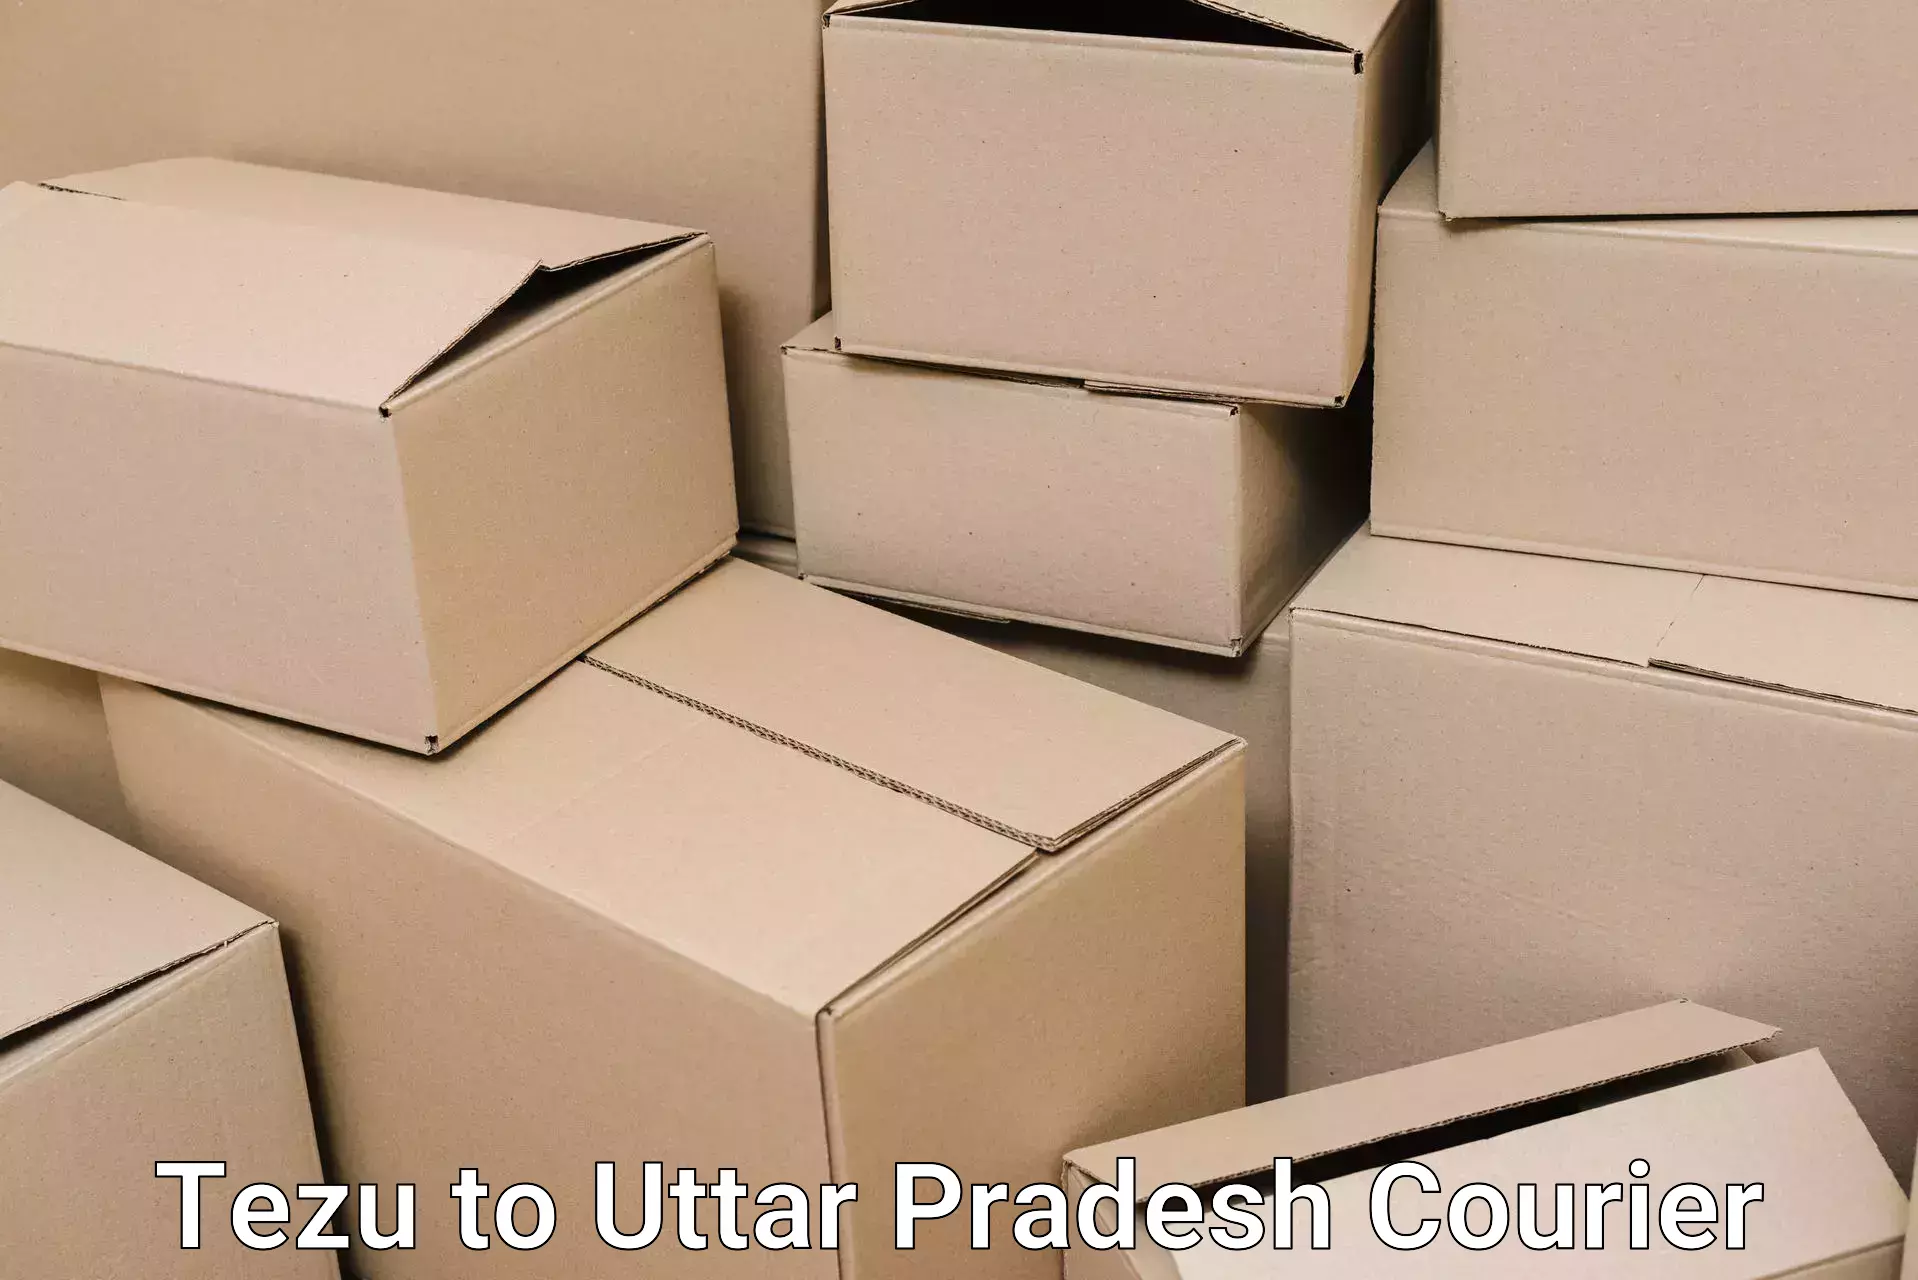 Furniture delivery service Tezu to Talbahat